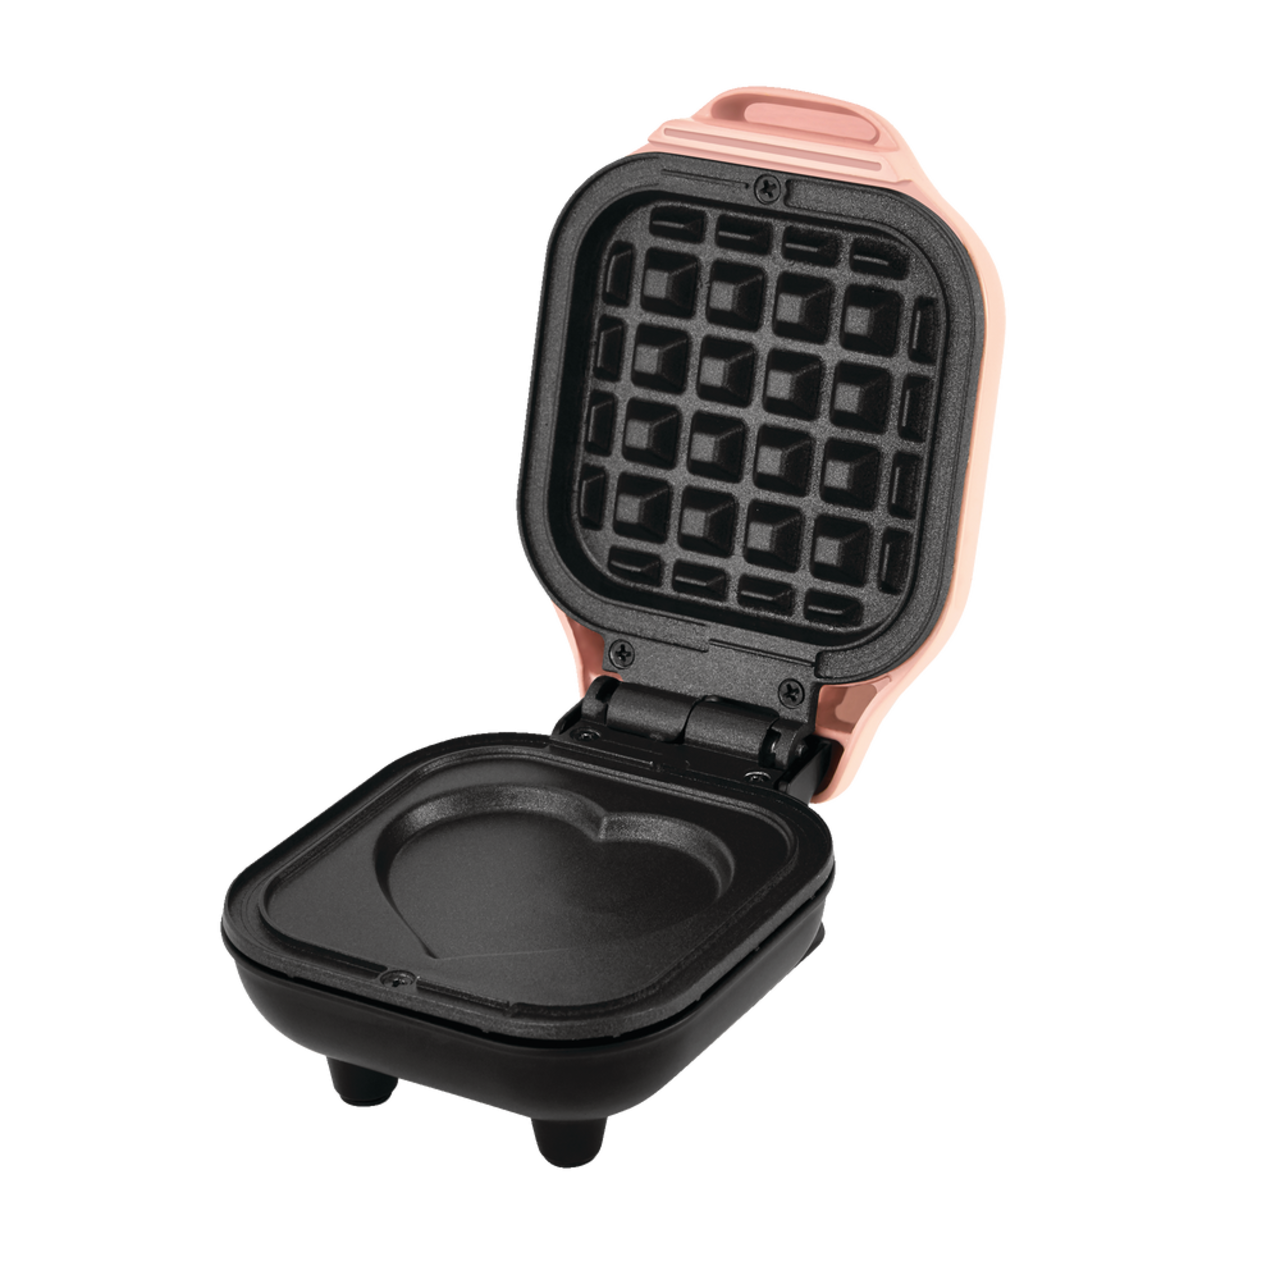 https://media-www.canadiantire.ca/product/living/kitchen/kitchen-appliances/0437063/rise-by-dash-heart-mini-waffle-maker-72c290e4-276b-4cea-8726-a2c0eff7b0fe.png?imdensity=1&imwidth=1244&impolicy=mZoom